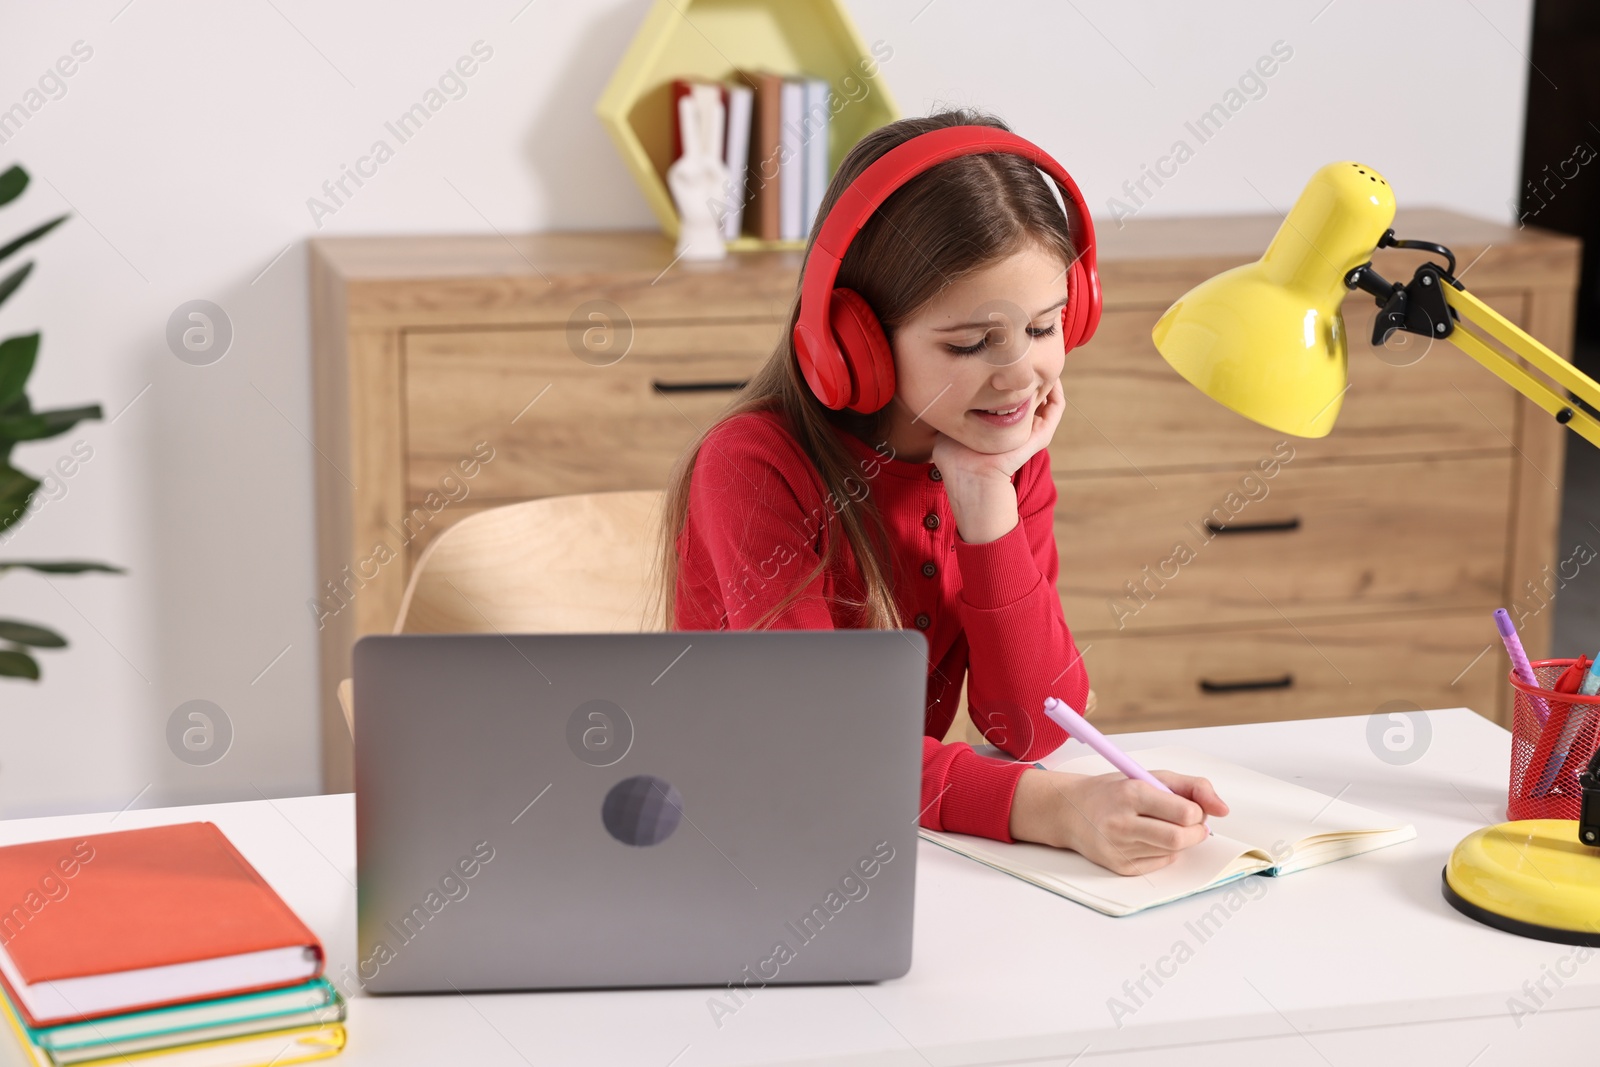 Photo of E-learning. Cute girl taking notes during online lesson at table indoors